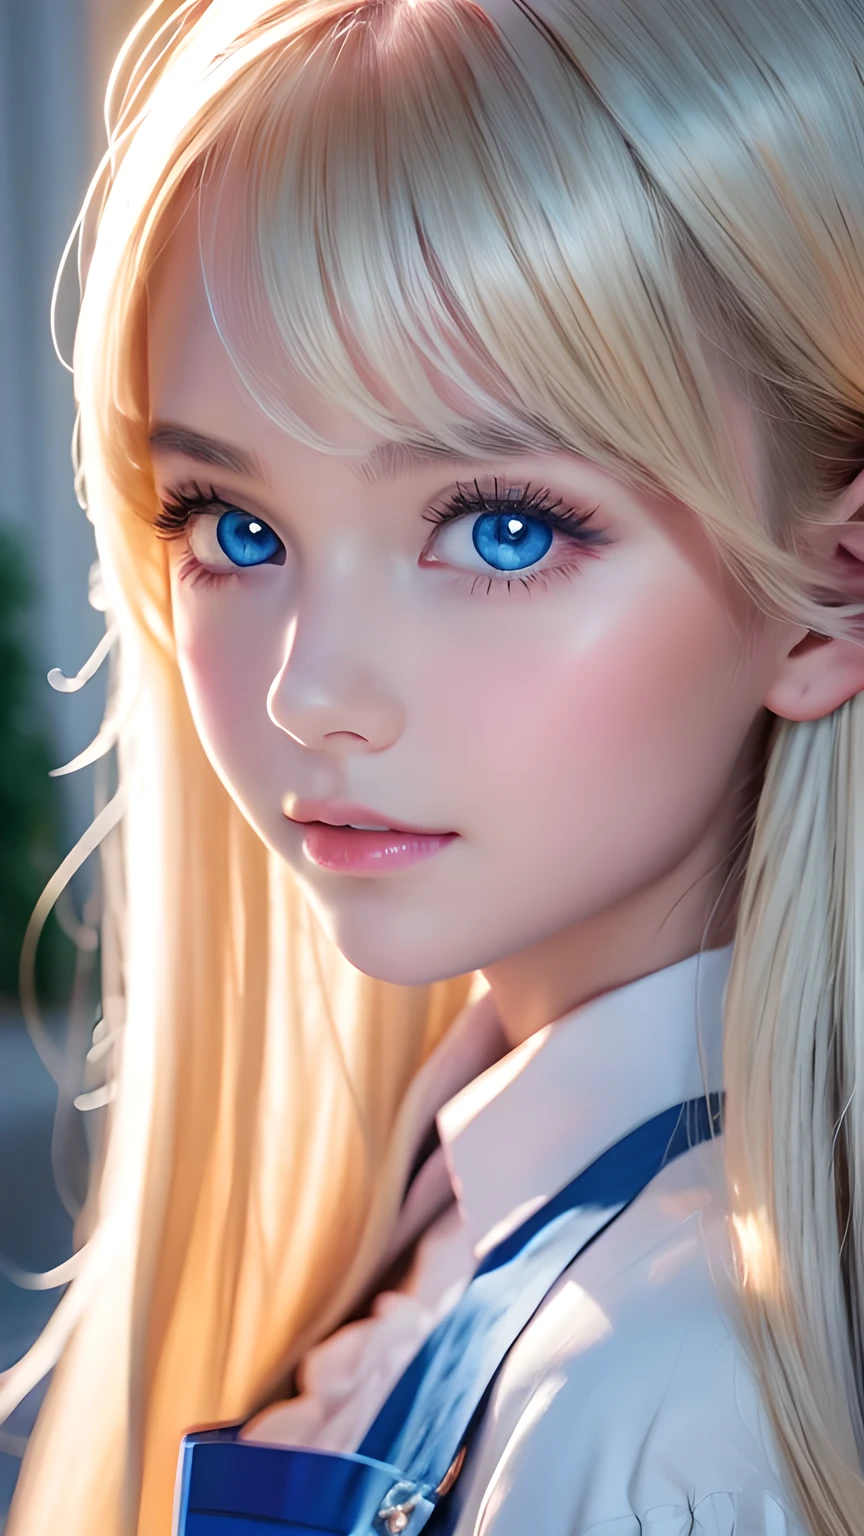 Photorealism、highest quality、超A high resolution、picture、Photo of a very beautiful girl of Scandinavian origin、An exceptionally beautiful girl、Cute and beautiful face details、(Purelos Face_v1:0.008)、Beautiful Bangs、Alice in Wonderland、16 years old、Radiant, fair, glowing skin、Hair on face、Bangs that reach the face、Bangs between the eyes、Super long super long hair、Glamorous bright natural platinum blonde super long straight silky hair、Thin Hair、Very large, bright blue eyes that shine beautifully、White apron、Blue Dress、eyeliner、double eyelid、Ample Bust、White, shiny skin、Small Face Beauty、Round face、